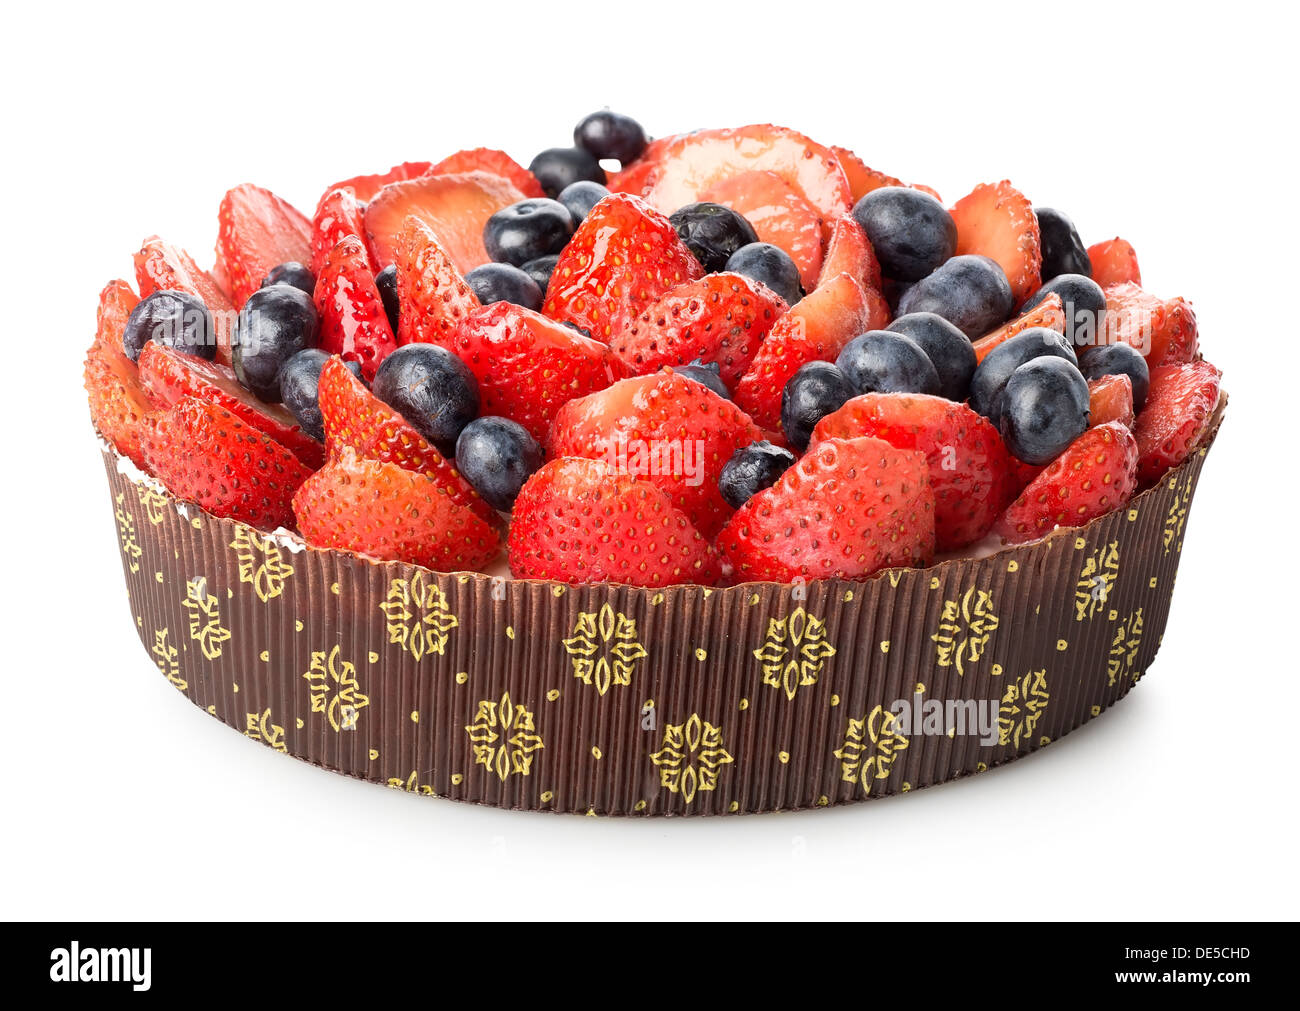 Berry cake isolated on a white background Stock Photo